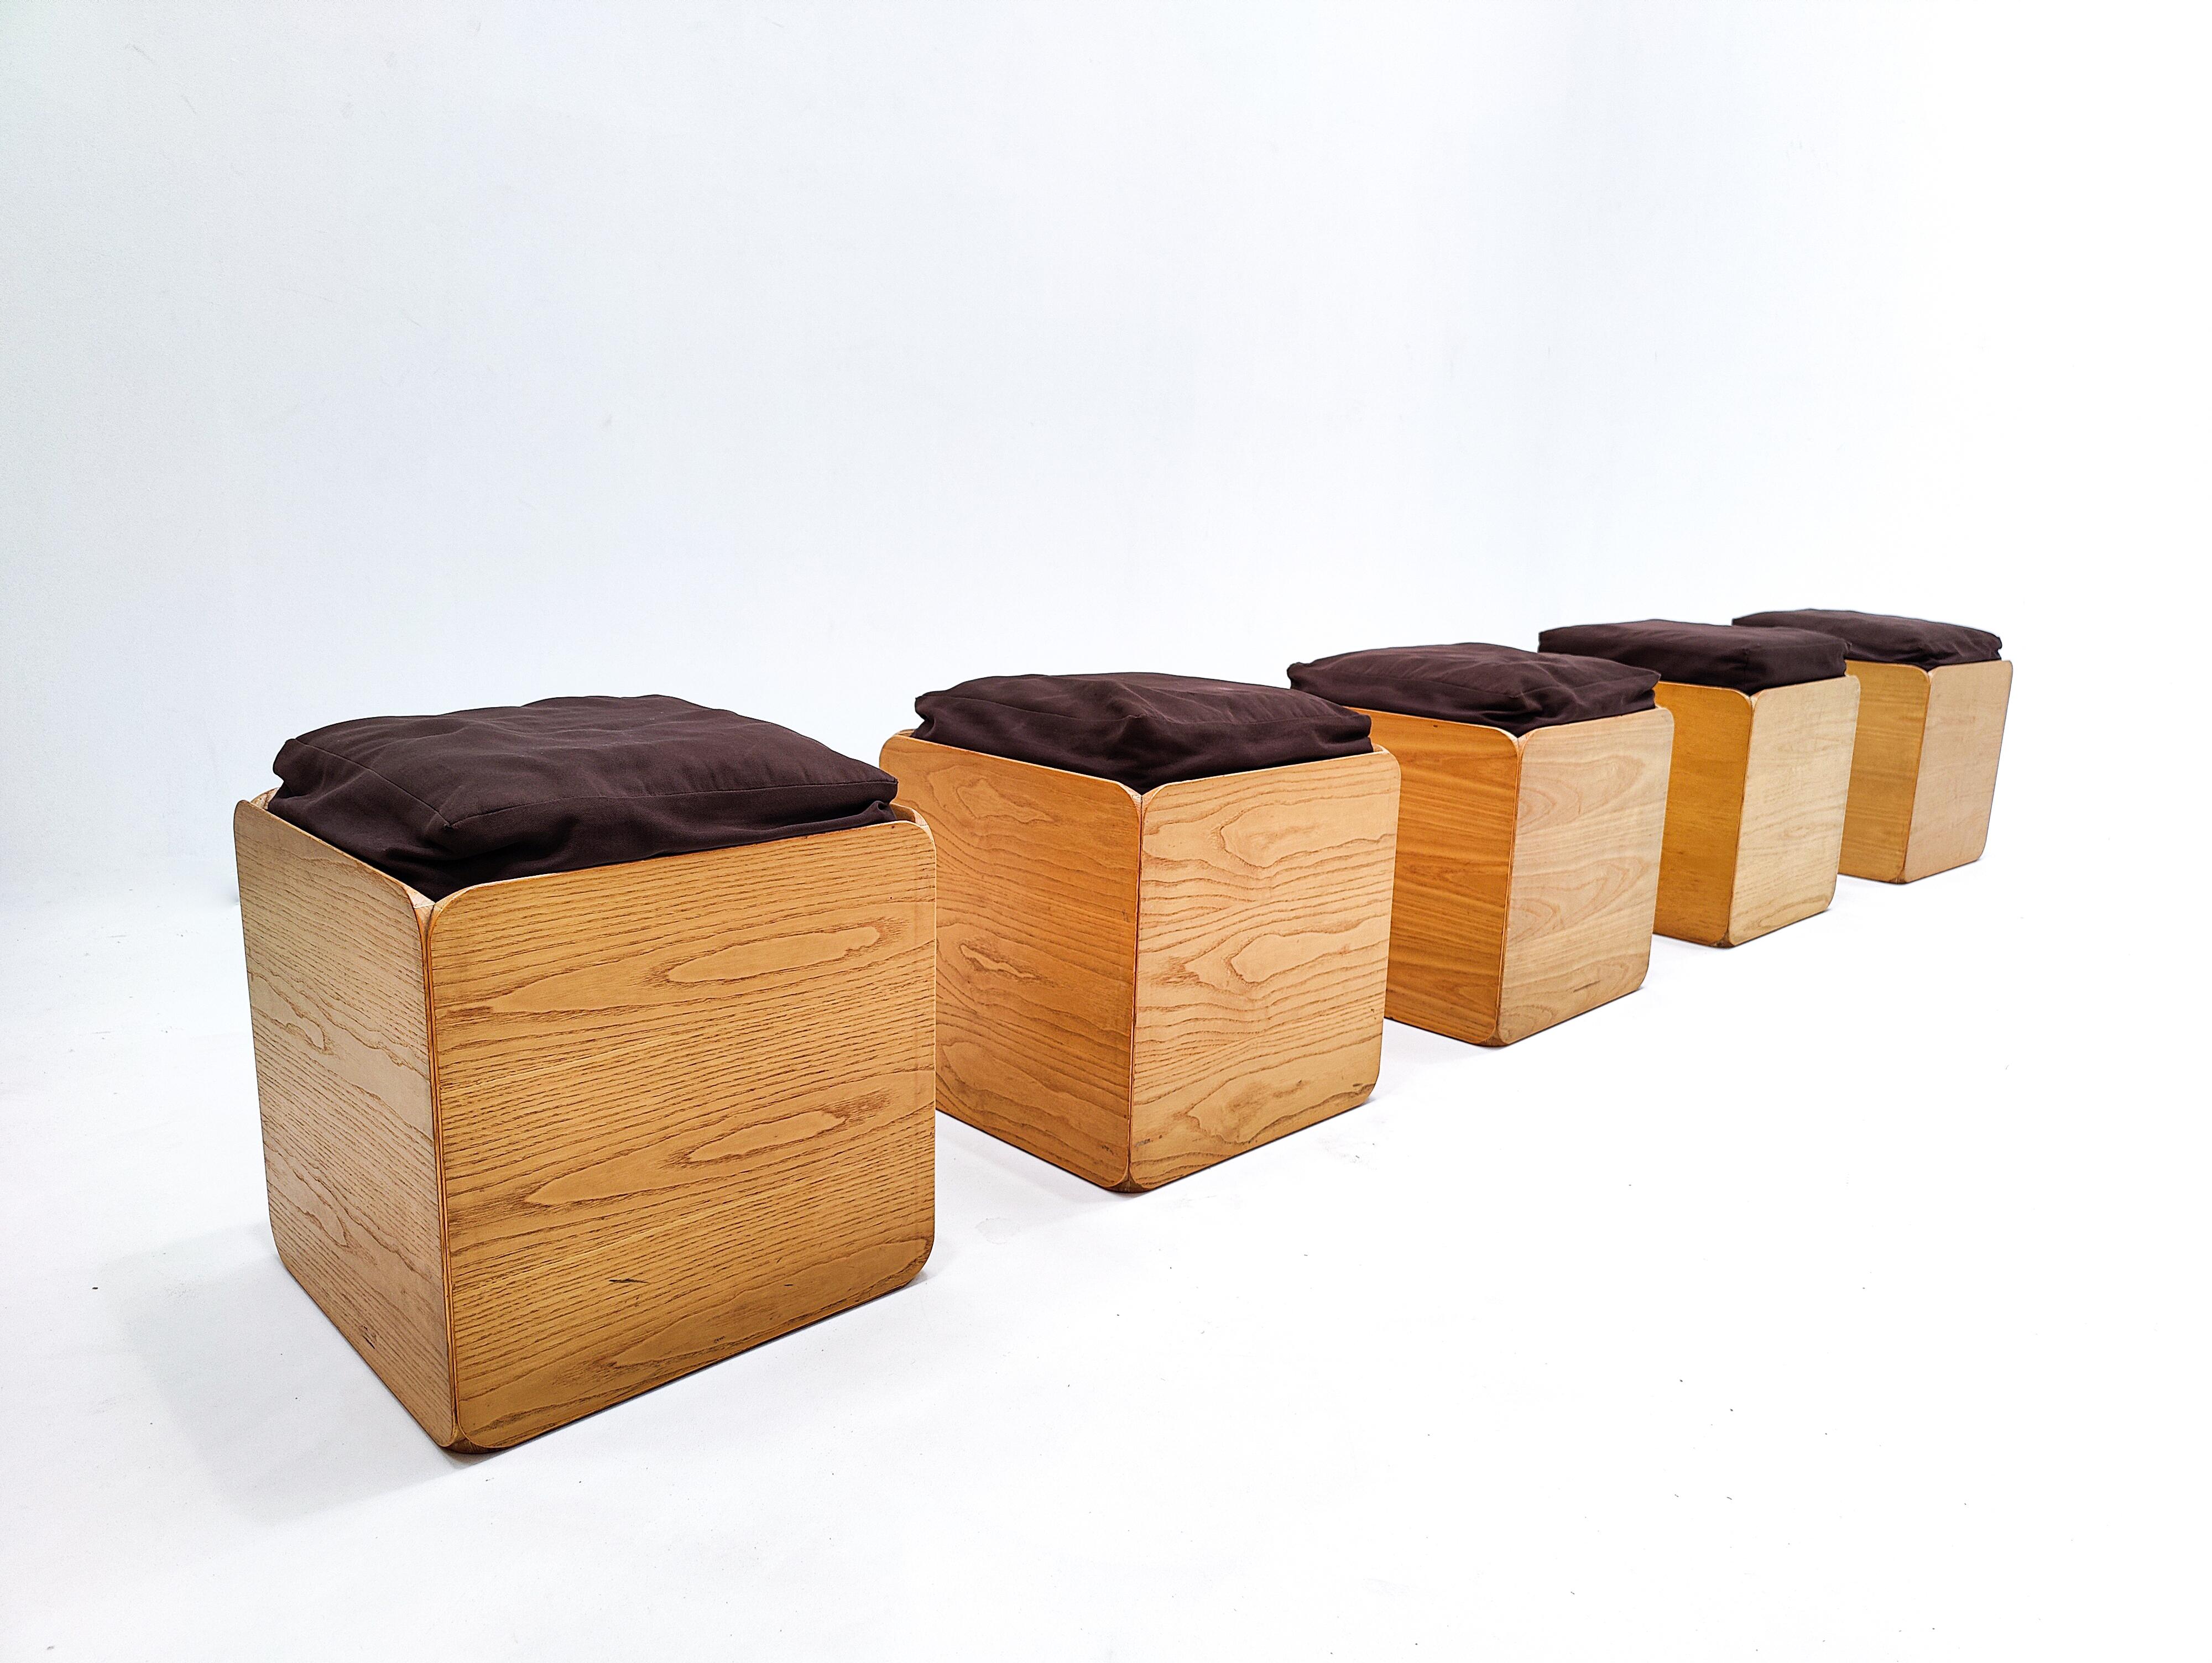 Wood Mid-Century Storage Stool by Derk Jan de Vries, 1960s, 5 Available